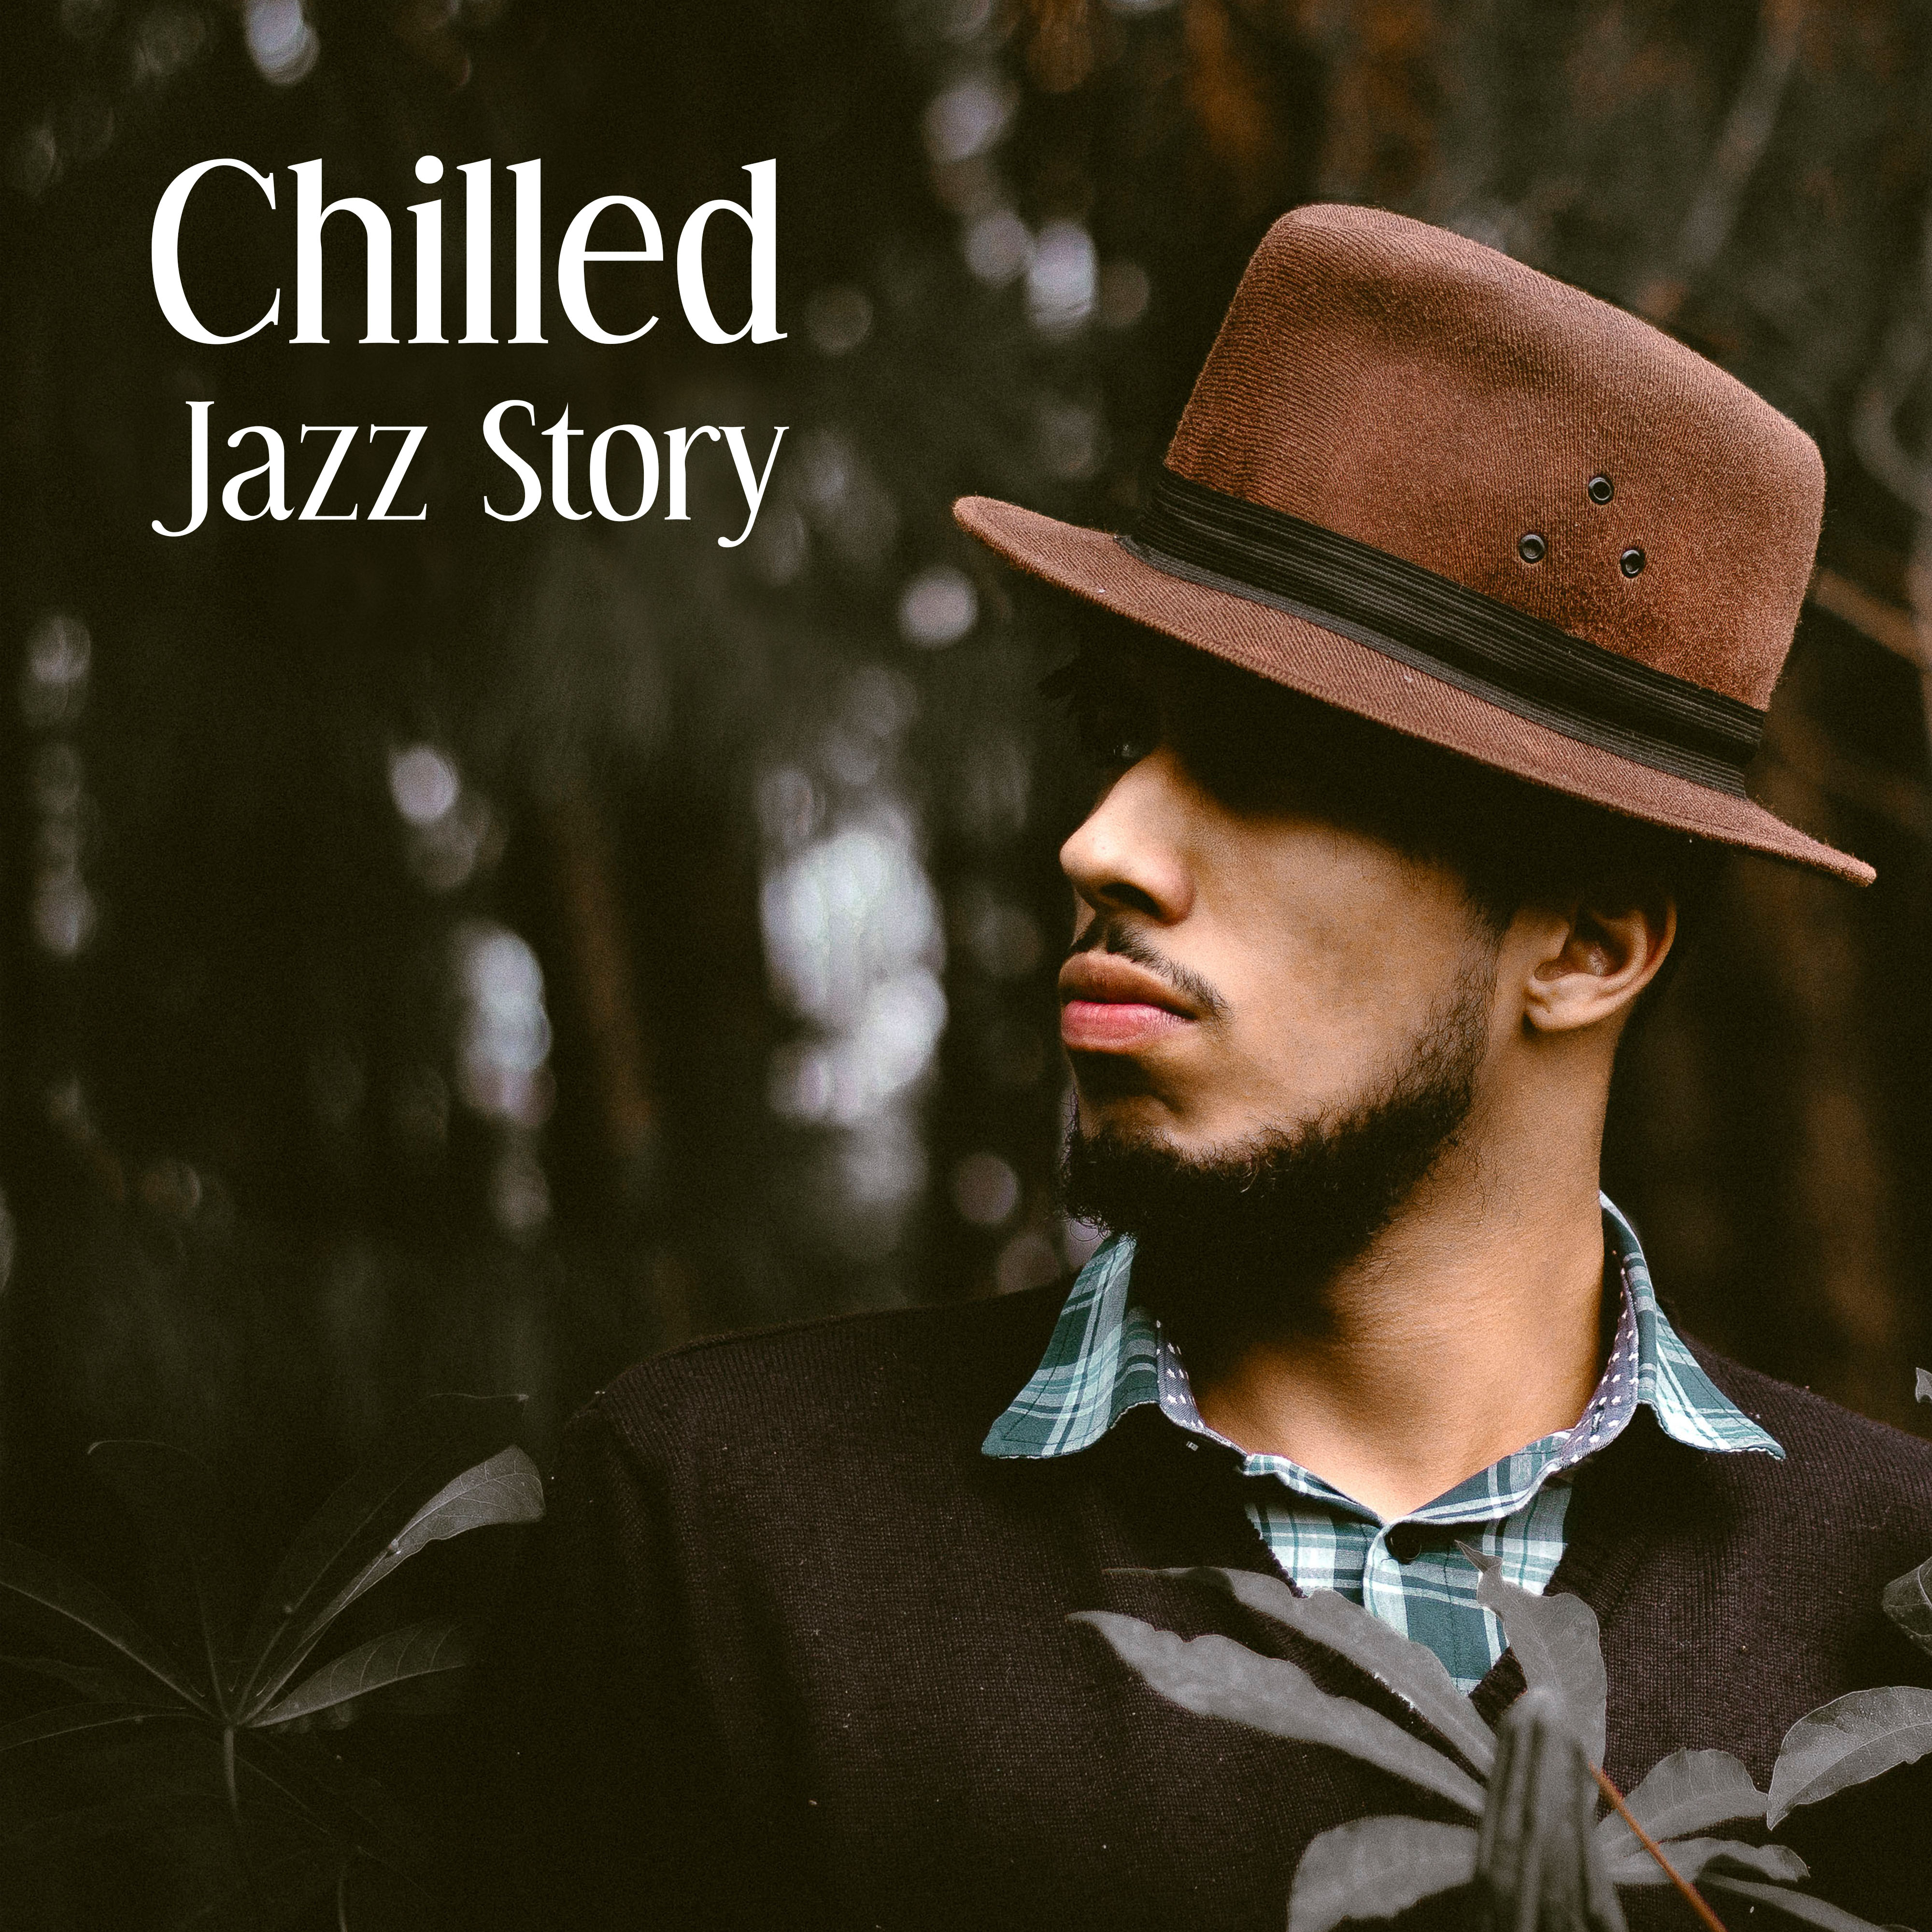 Chilled Jazz Story – Relaxed Jazz, Instrumental Music, Smooth Jazz, Chilled Jazz Lounge